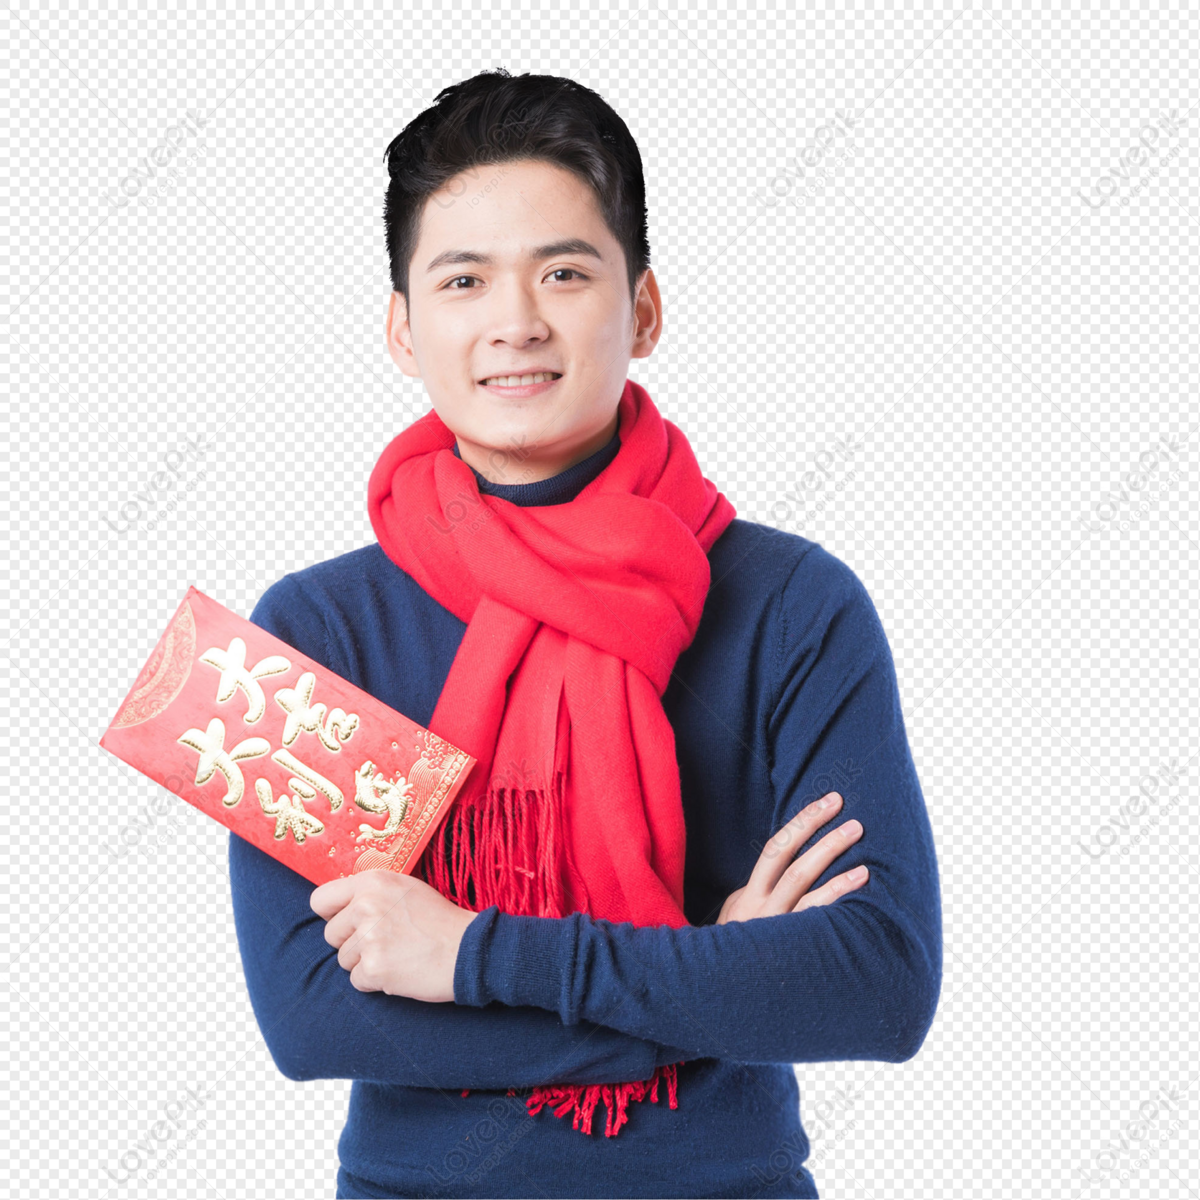 New Years Male Portrait With Red Envelopes PNG Transparent And Clipart ...